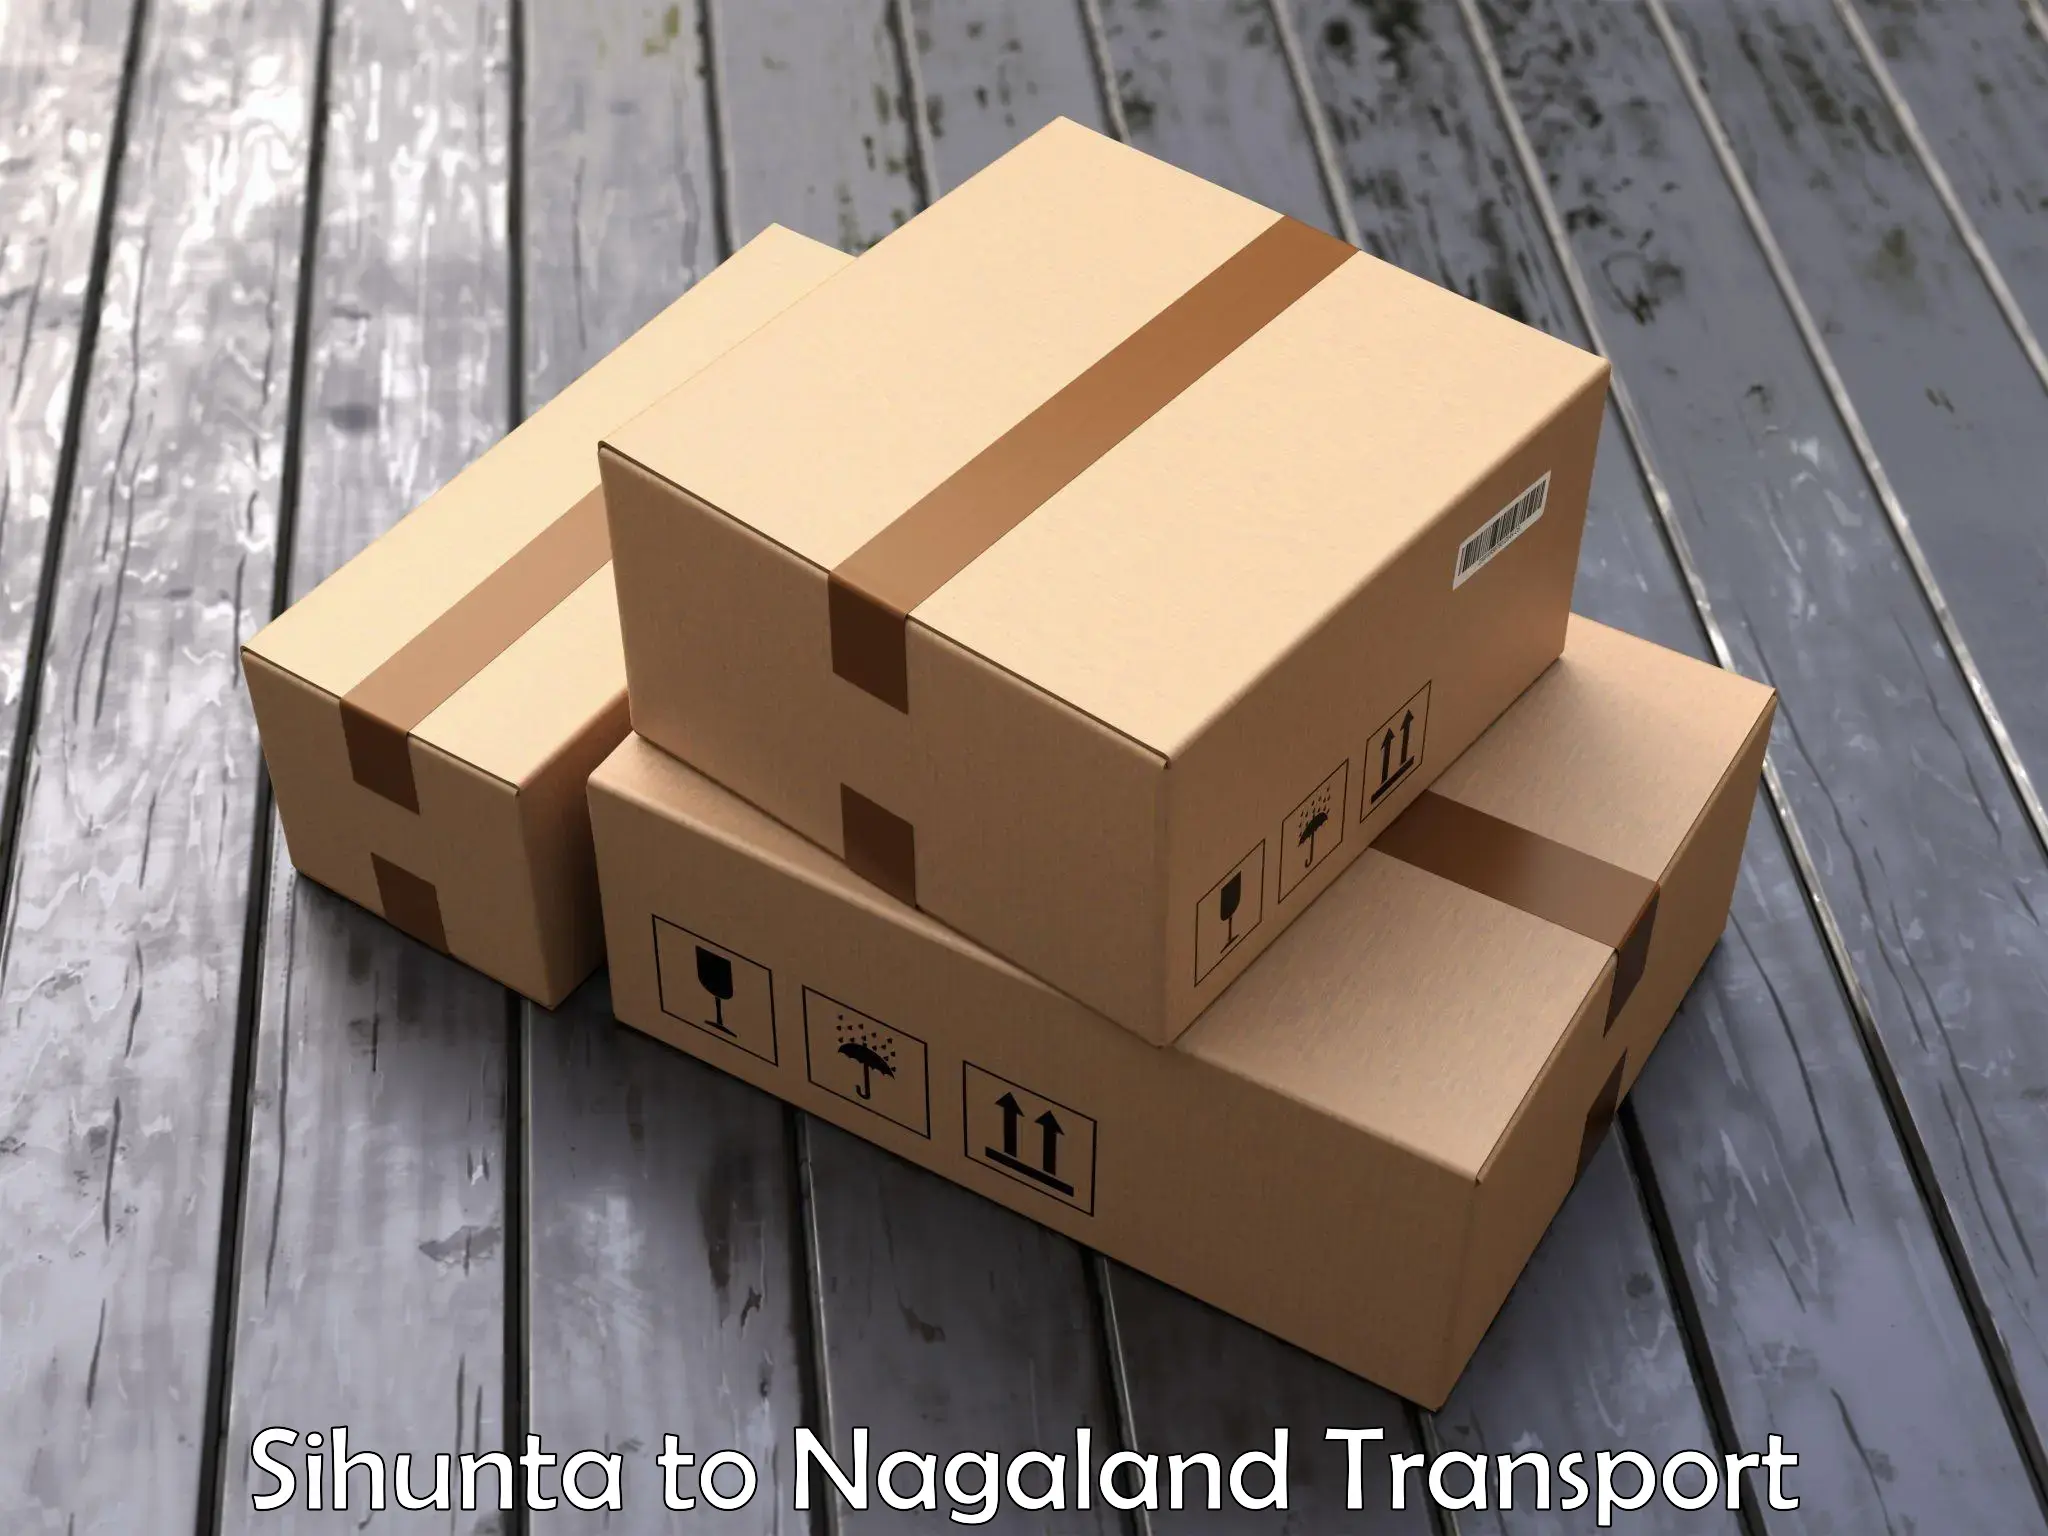 Commercial transport service Sihunta to Nagaland